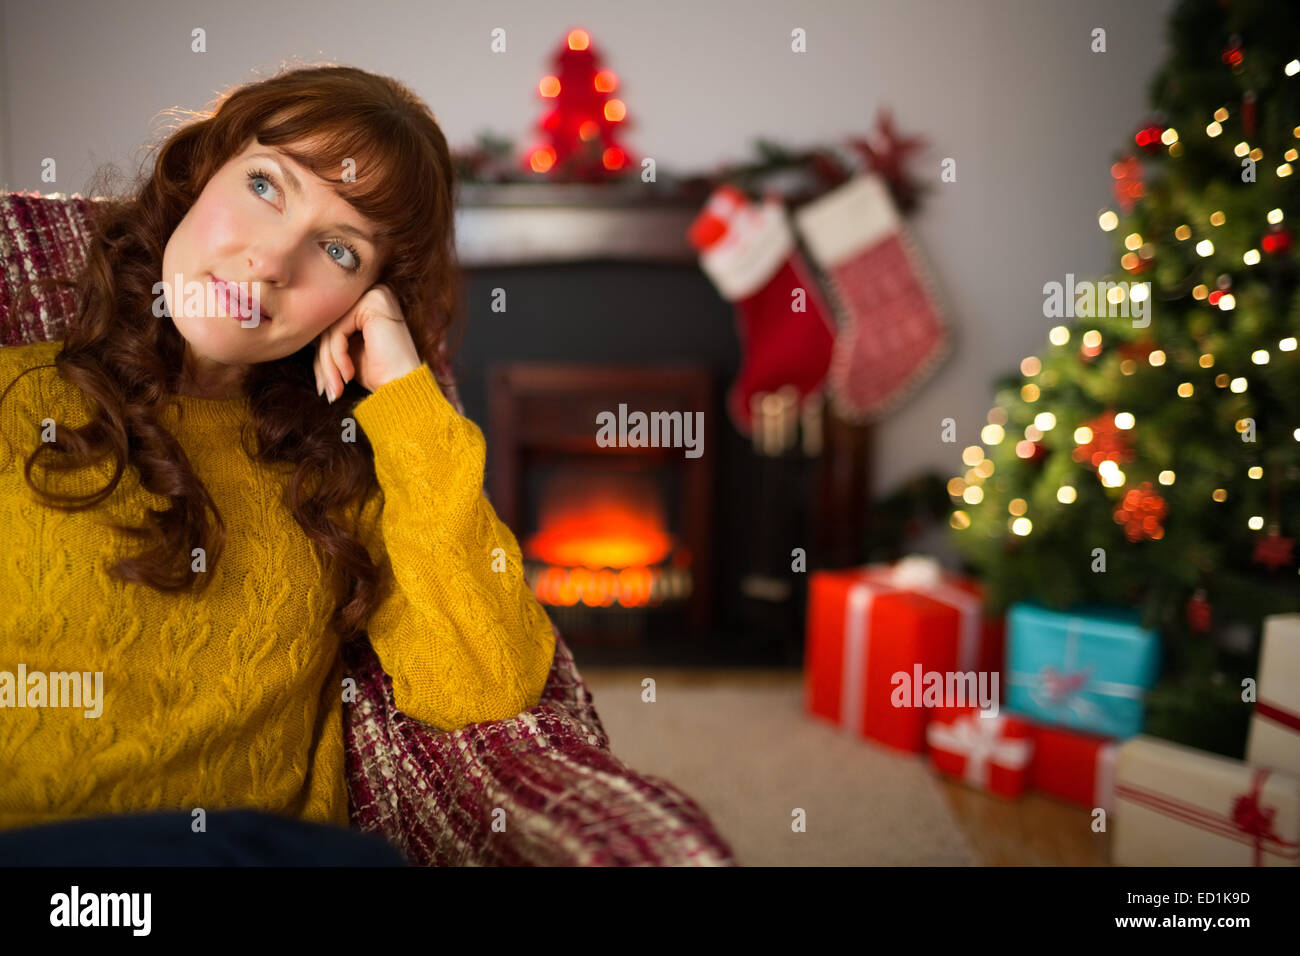 Beauty redhead thinking and relaxing at christmas Stock Photo